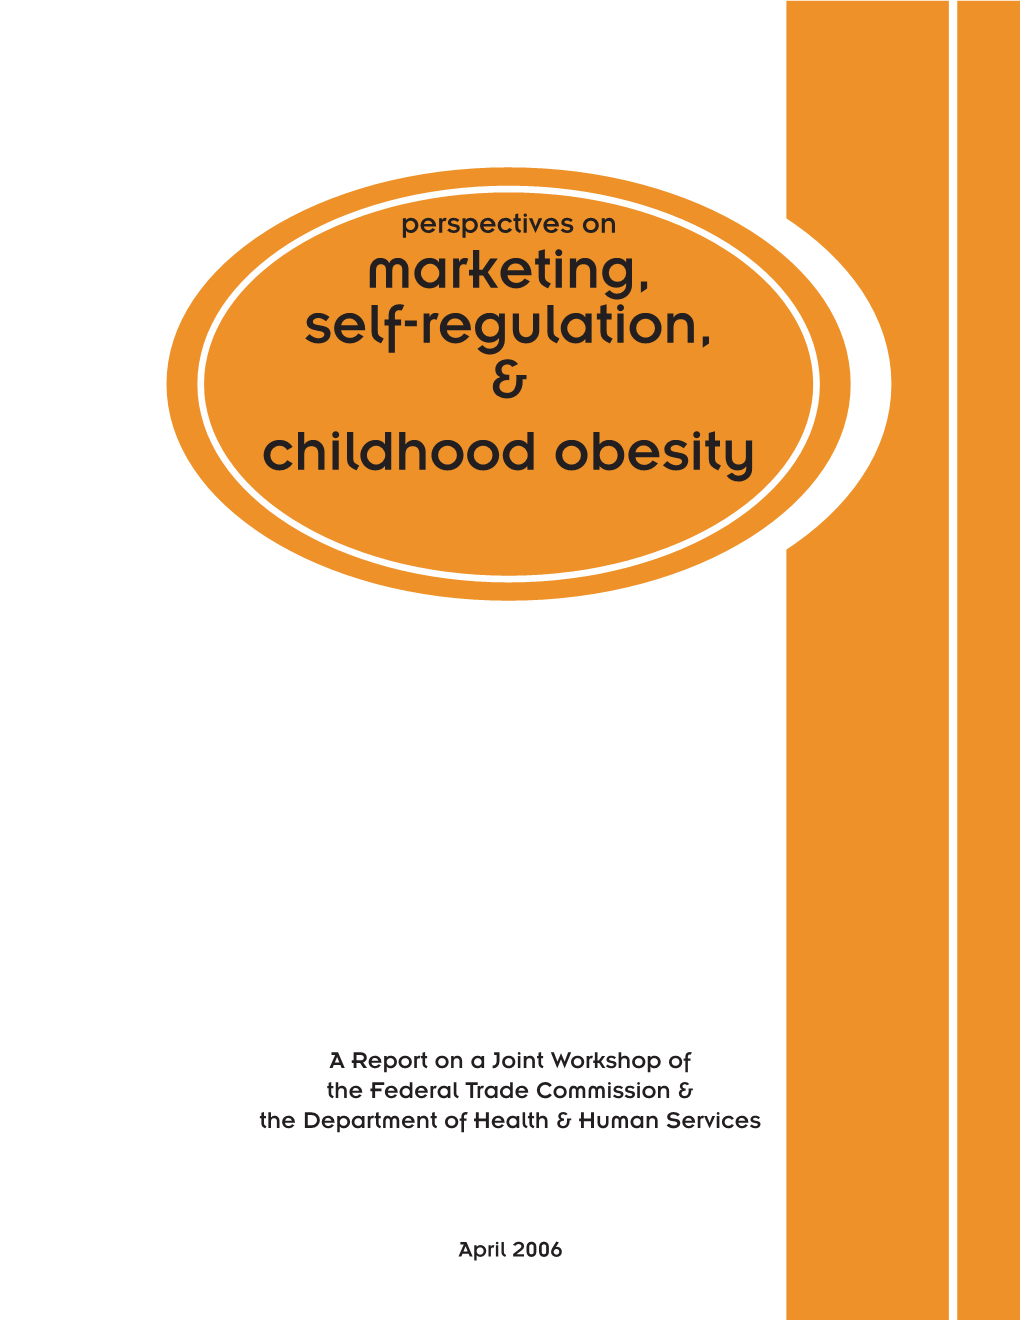 Perspectives on Marketing, Self-Regulation, & Childhood Obesity: a Report on a Joint Workshop of the Federal Trade Commissi